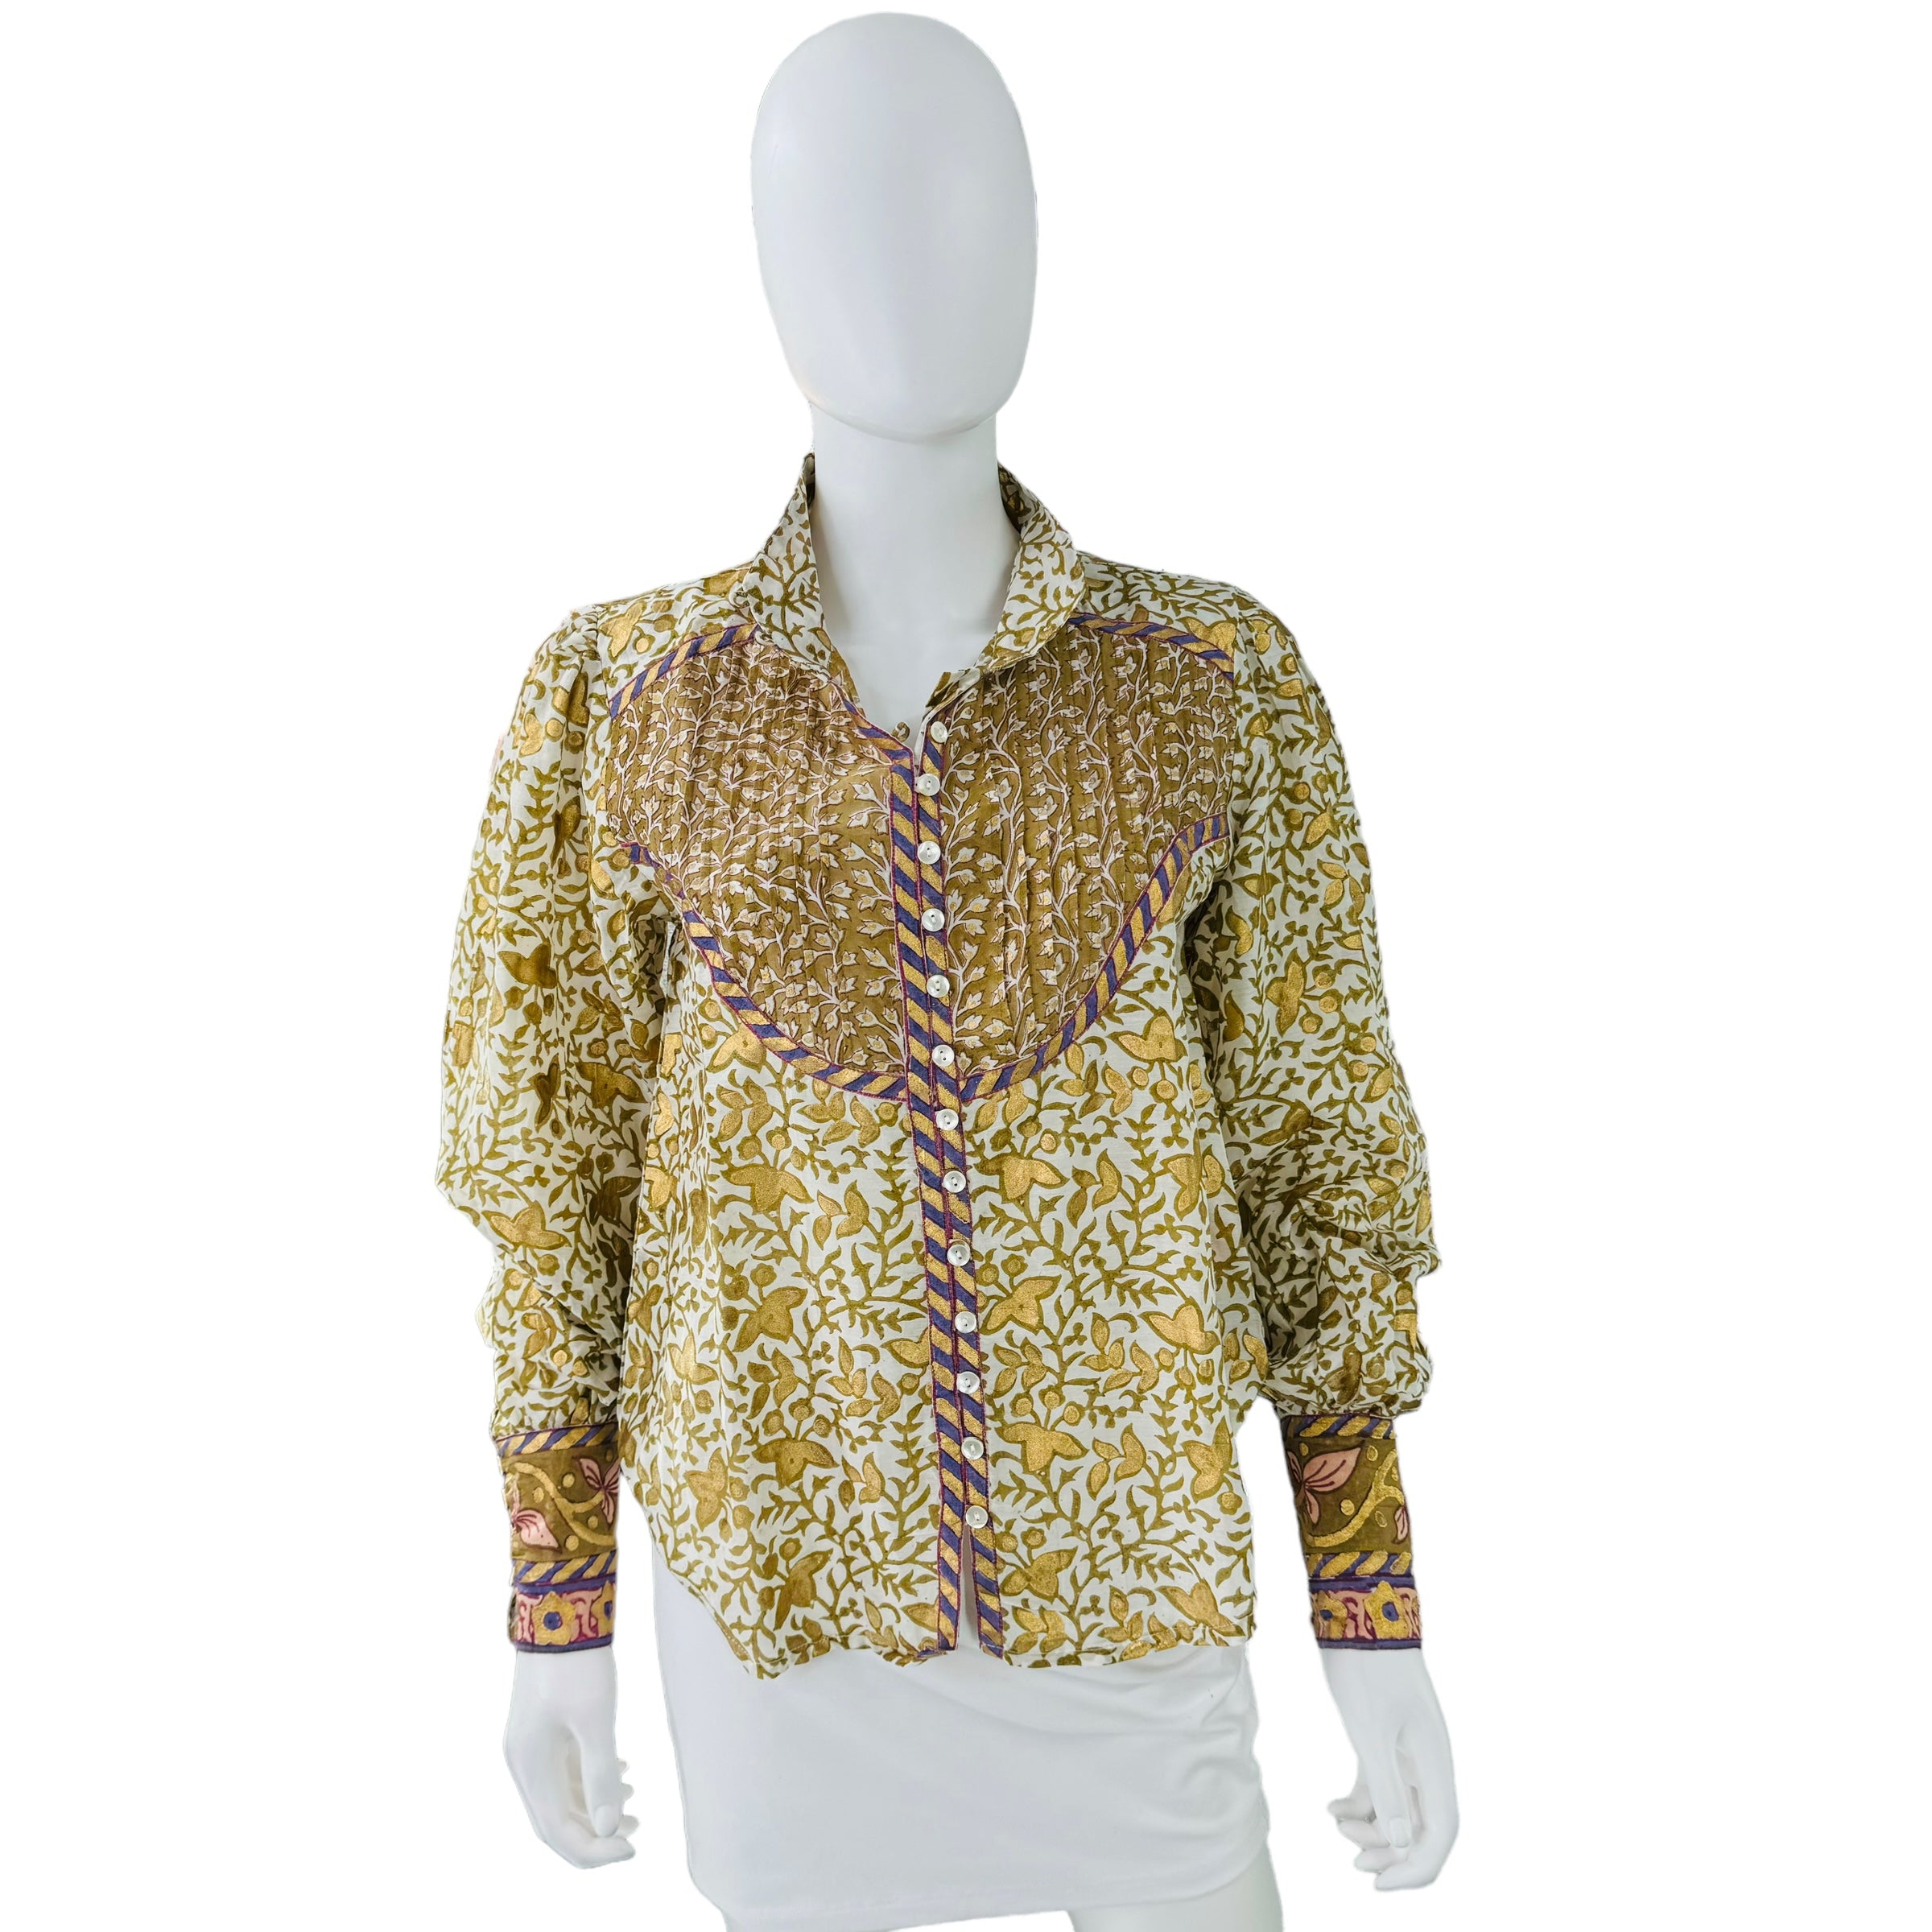 Oliphant High Neck Button Silk Blouse in Marchesa Metallic Floral Olive